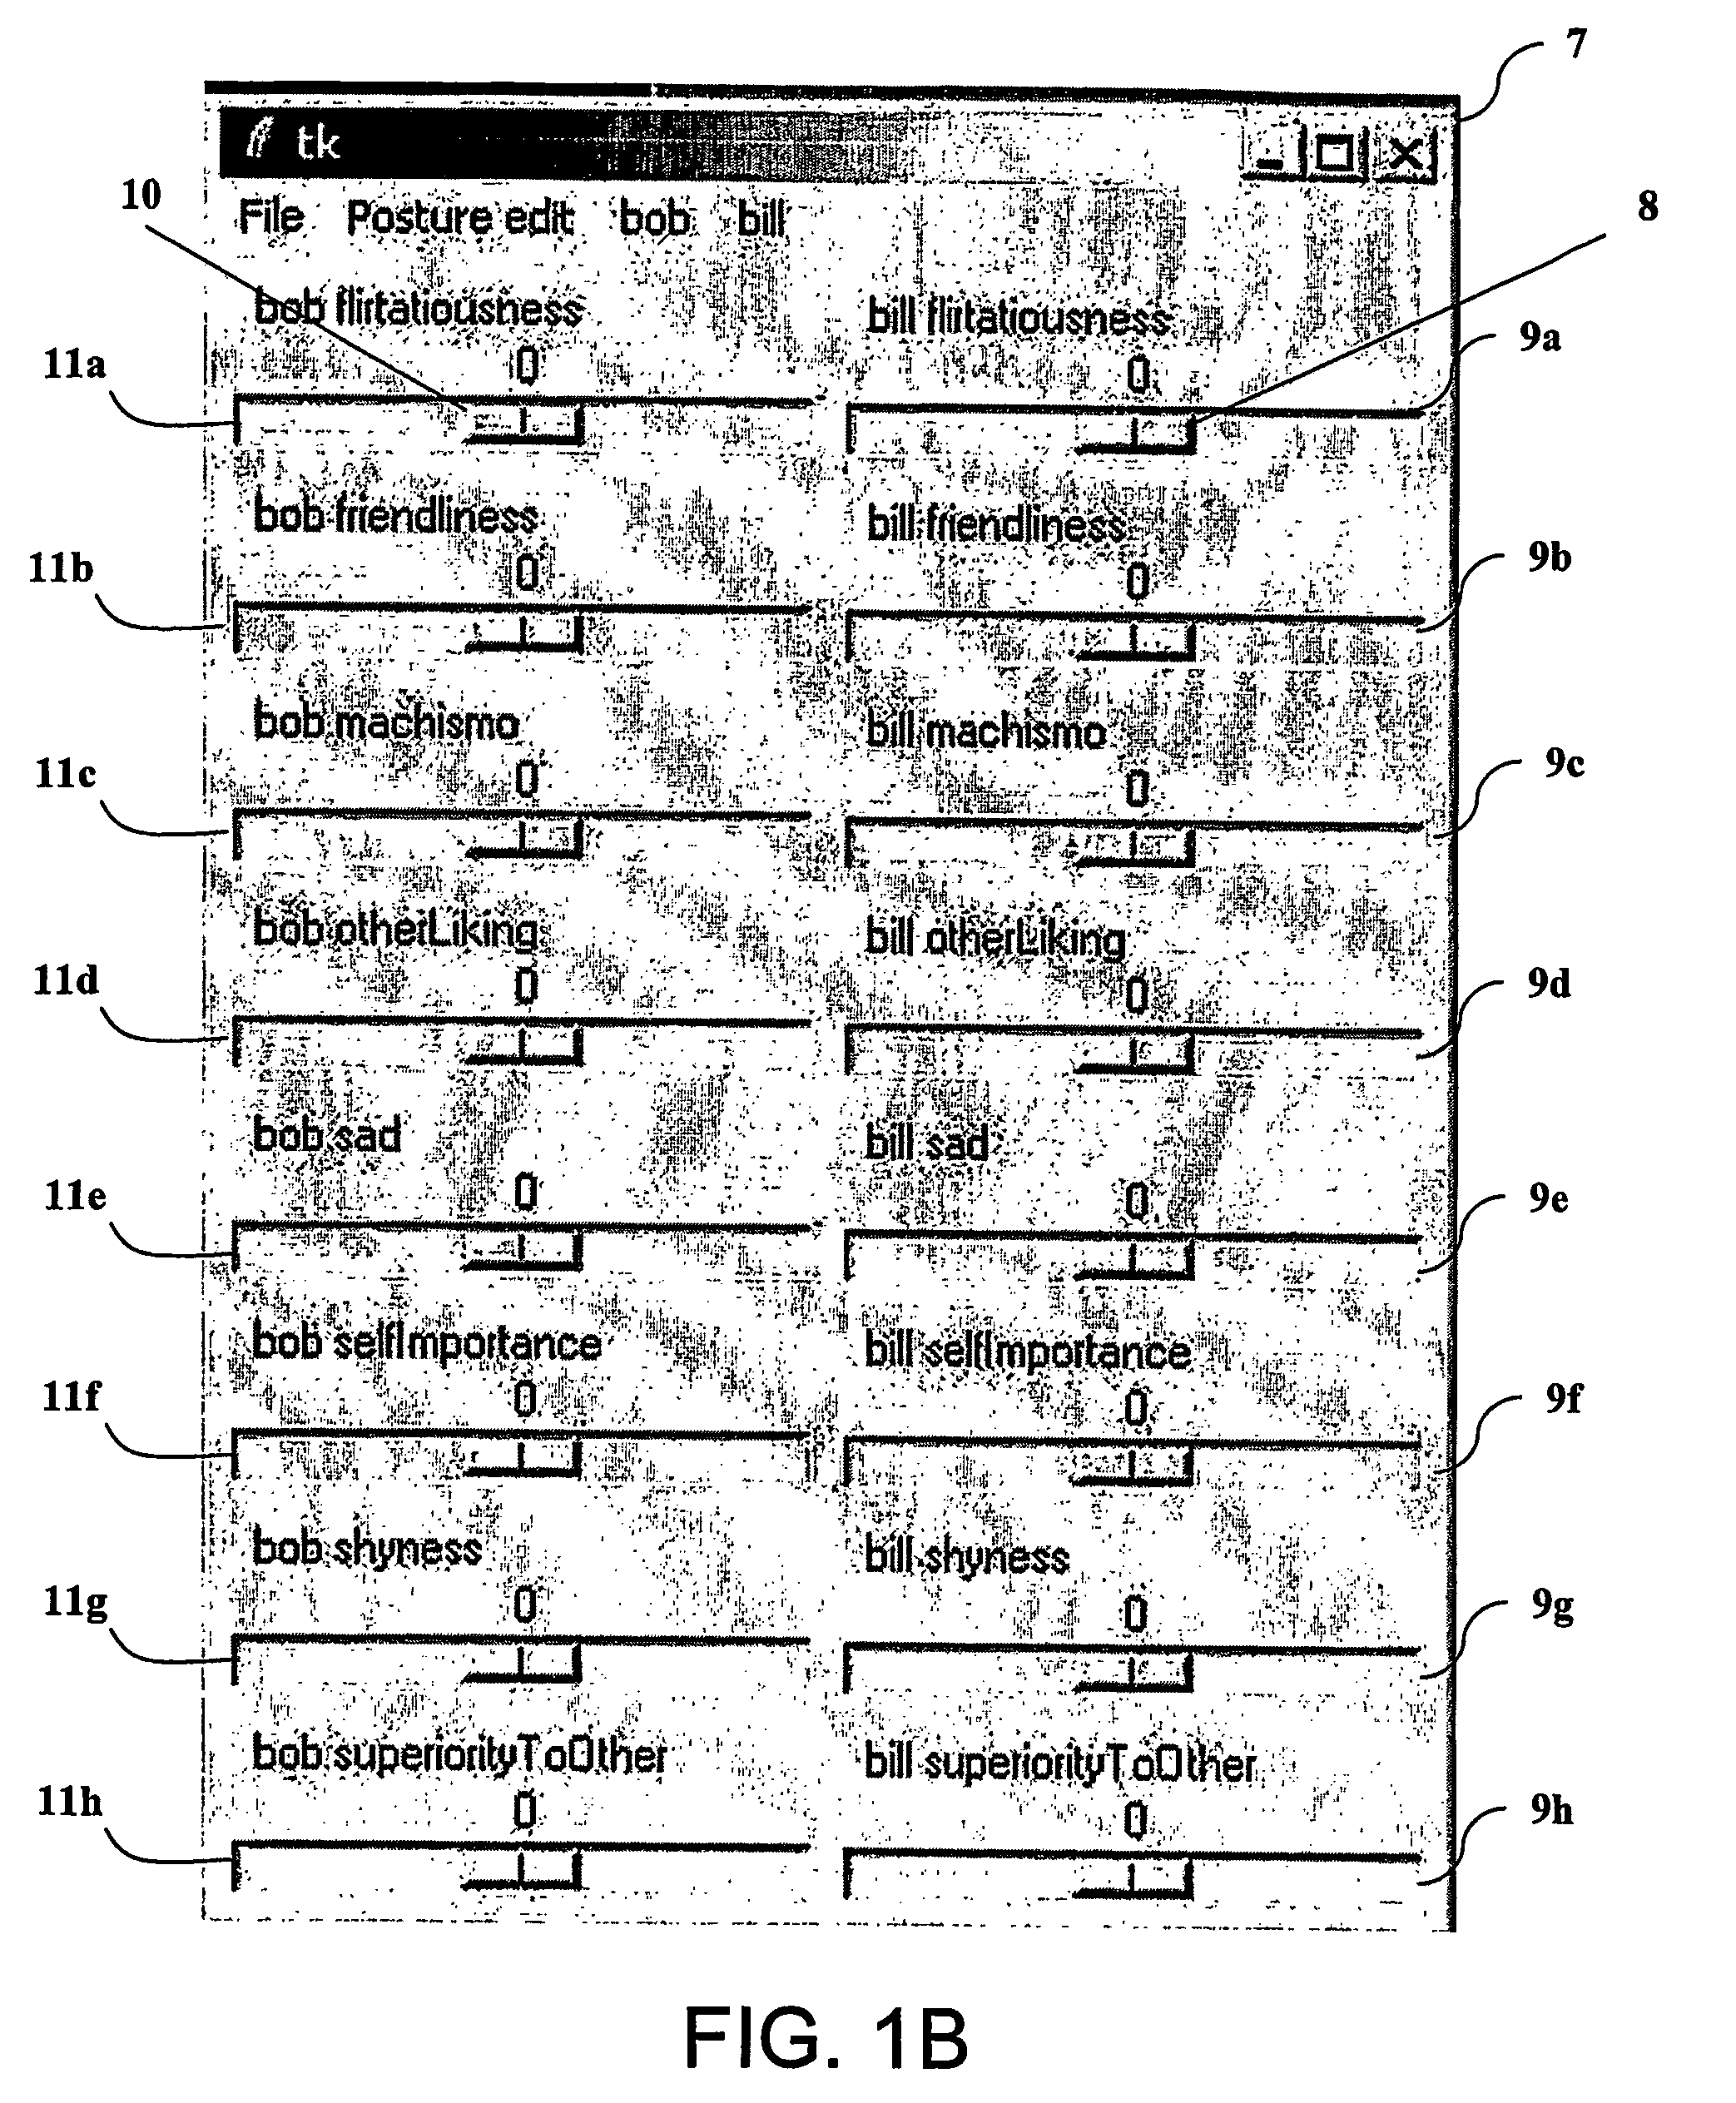 Apparatus and method for generating behaviour in an object